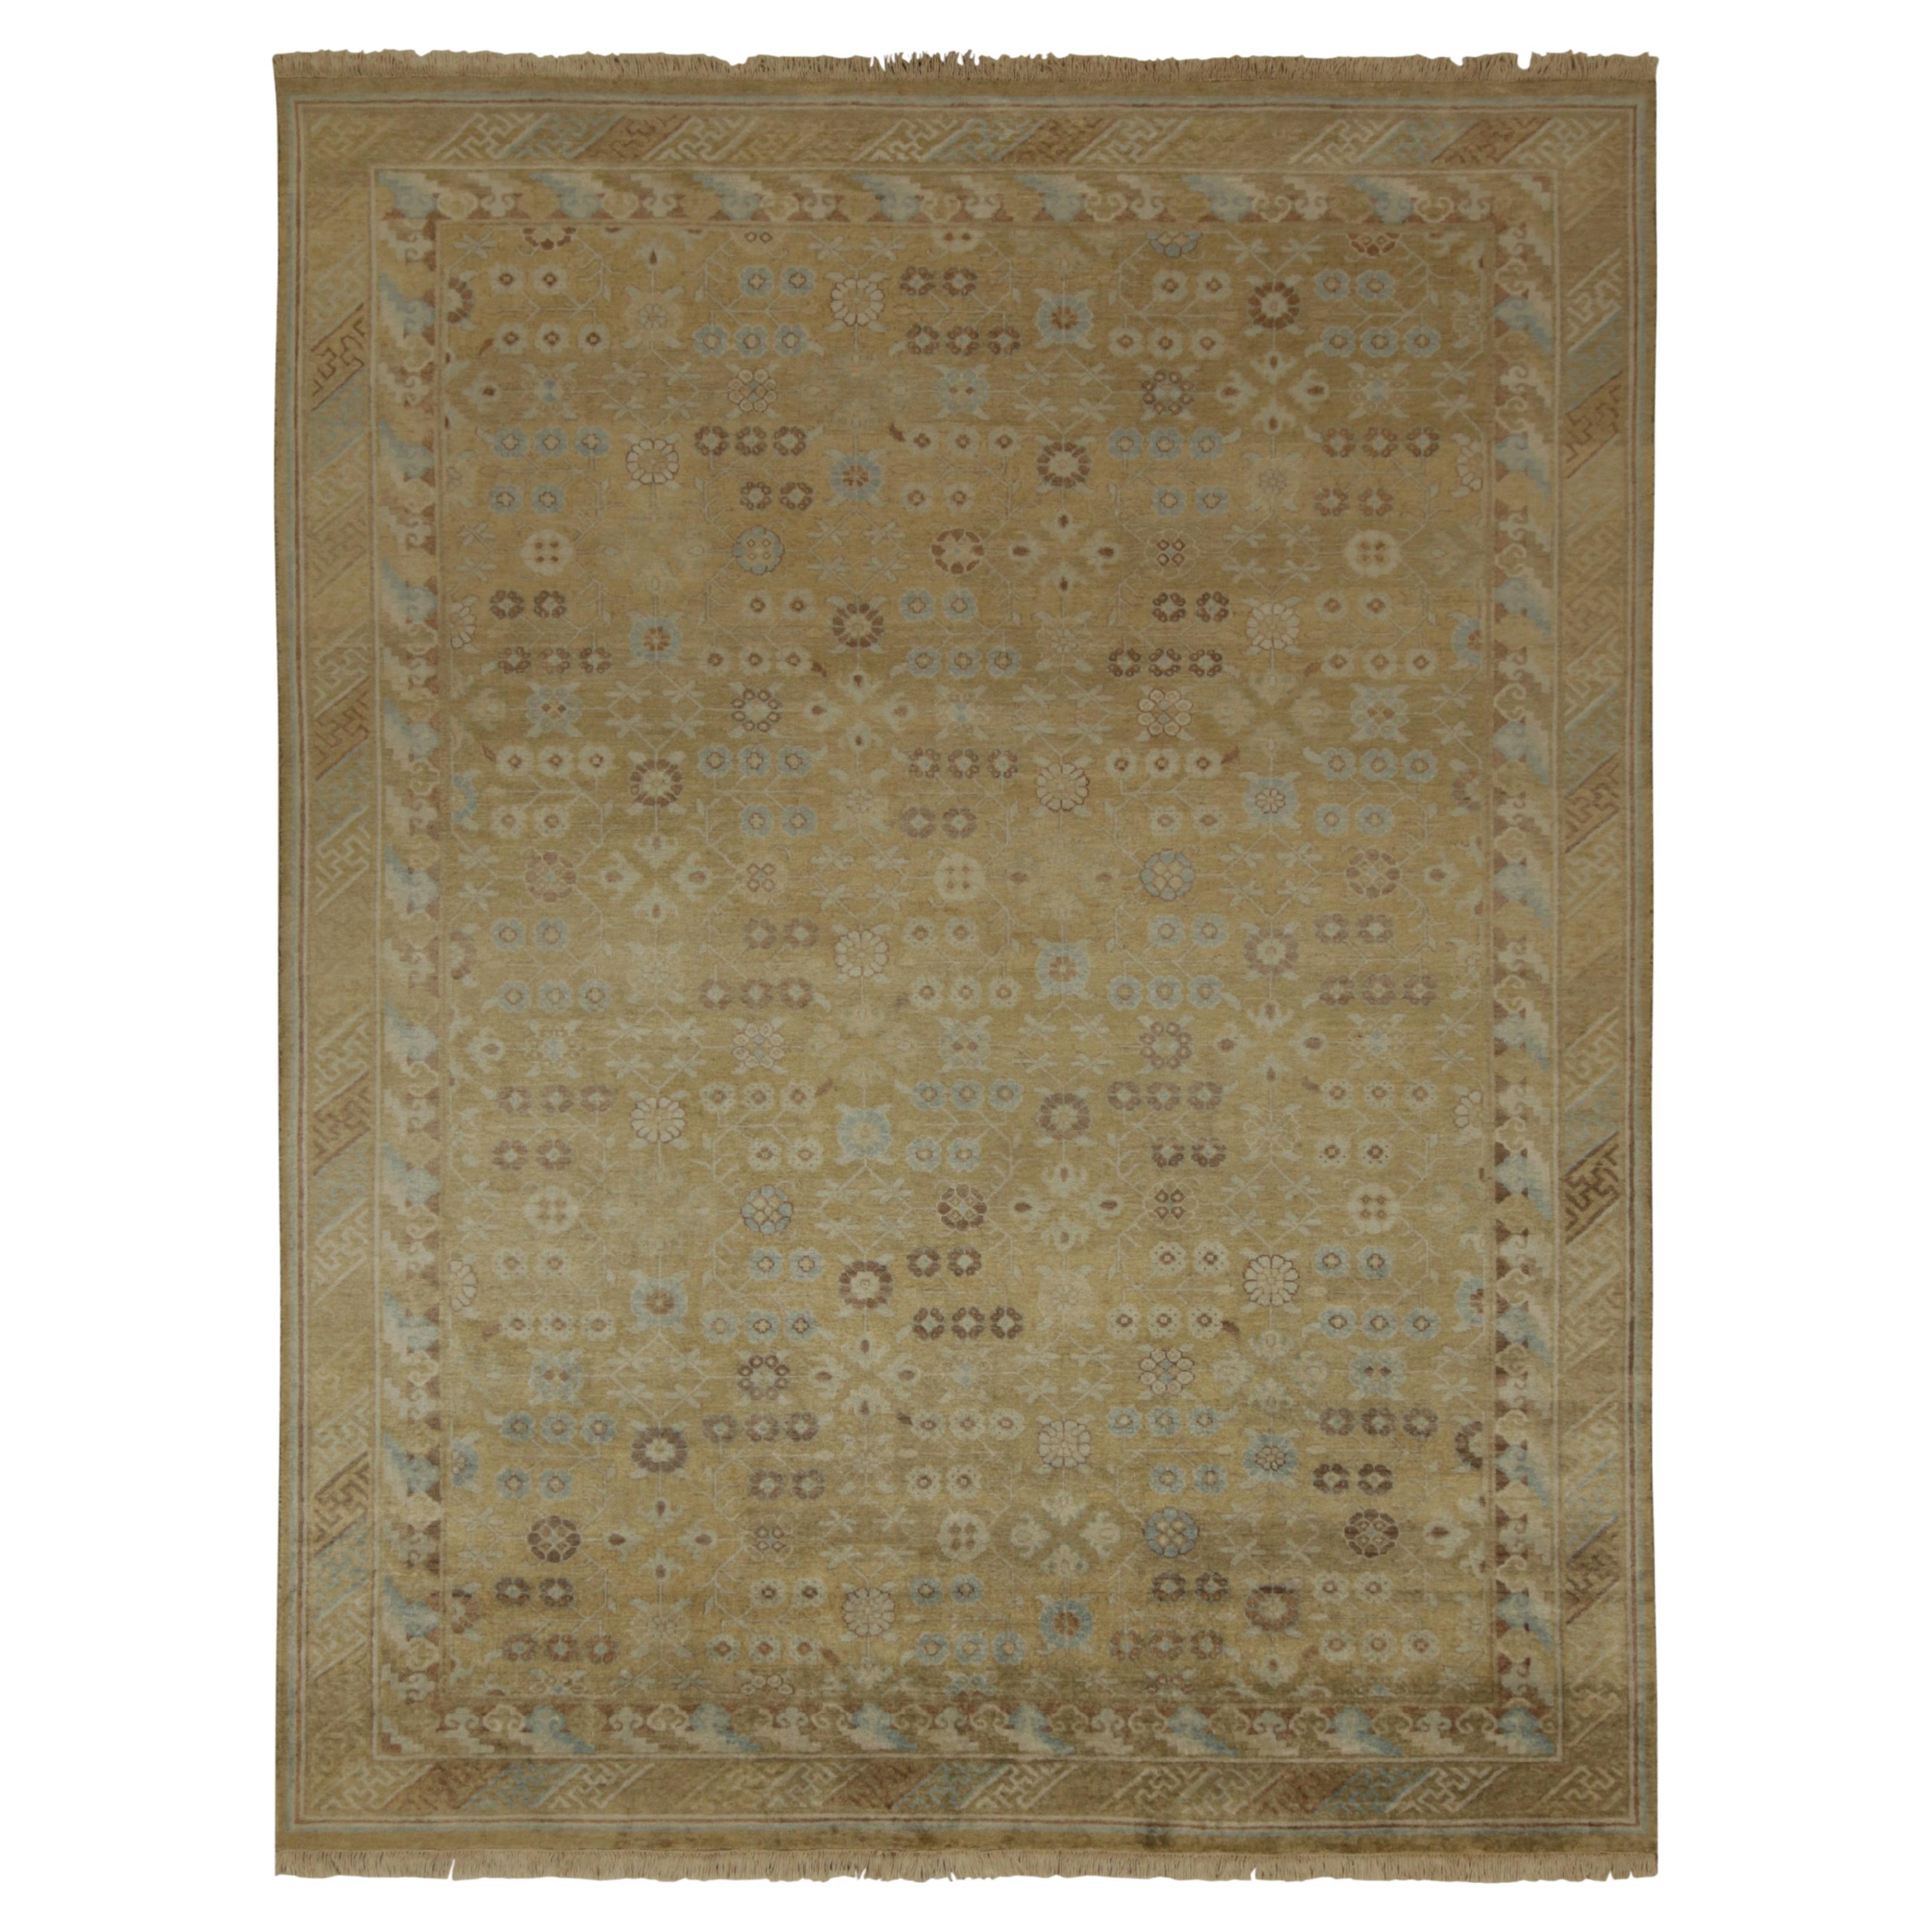 Rug and Kilim's Traditional Khotan Style Geometric Beige Brown and Blue ...